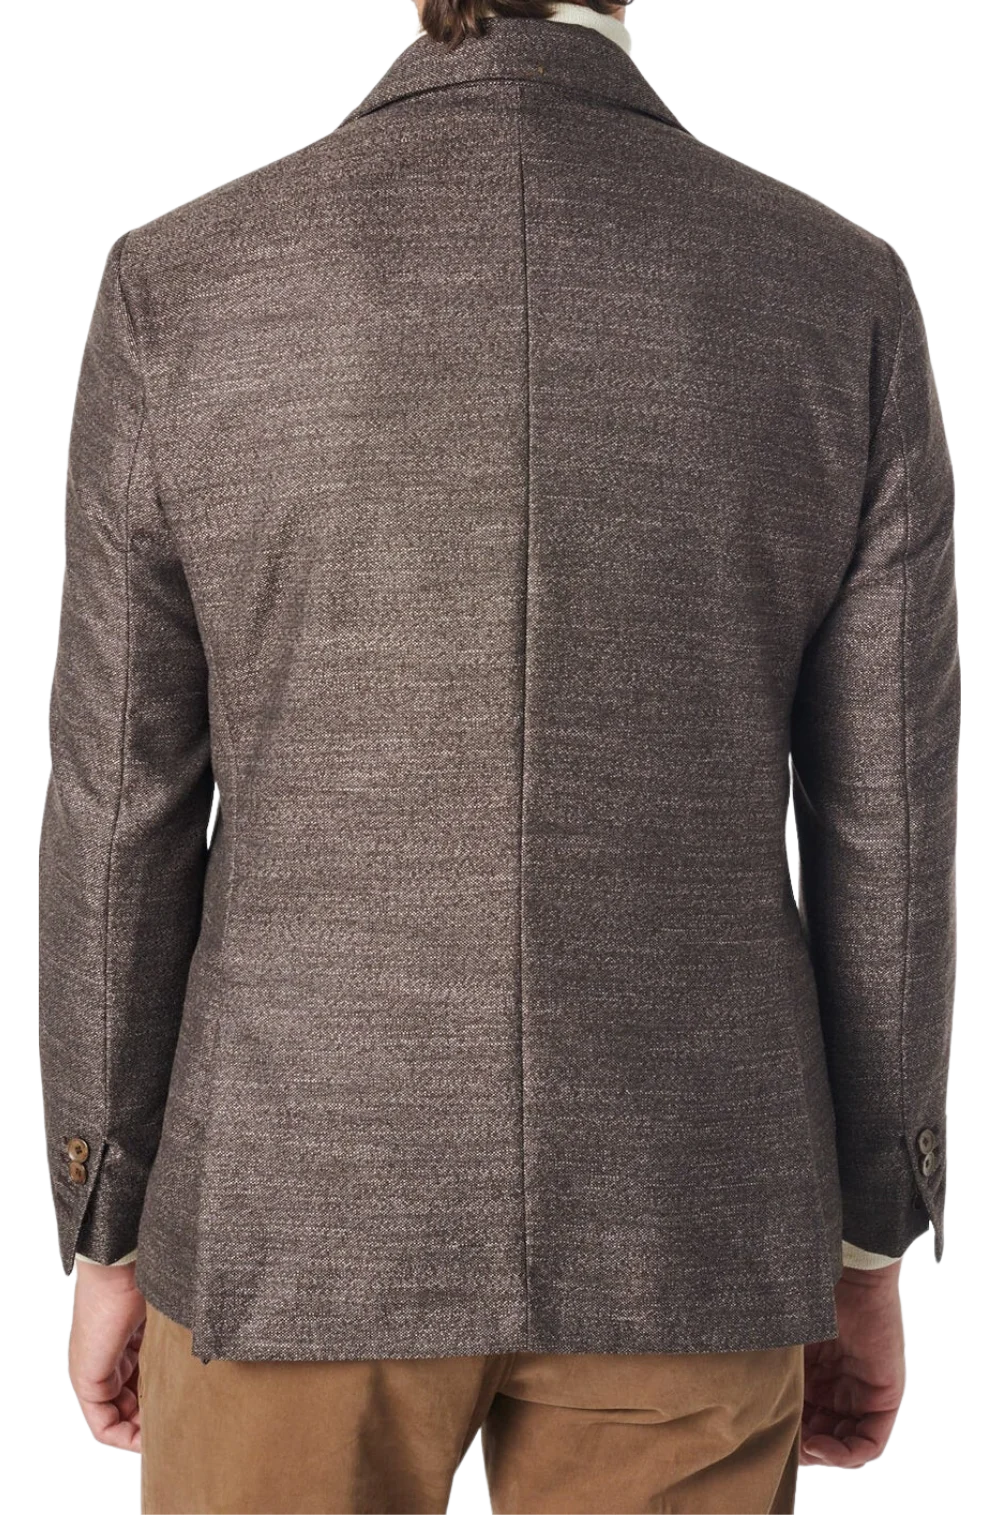 Men's Fusaro Austine Melange Wool Blend Jacket in Brown (21089) - available in-store, 337 Monty Naicker Street, Durban CBD or online at Omar's Tailors & Outfitters online store.   A men's fashion curation for South African men - established in 1911.